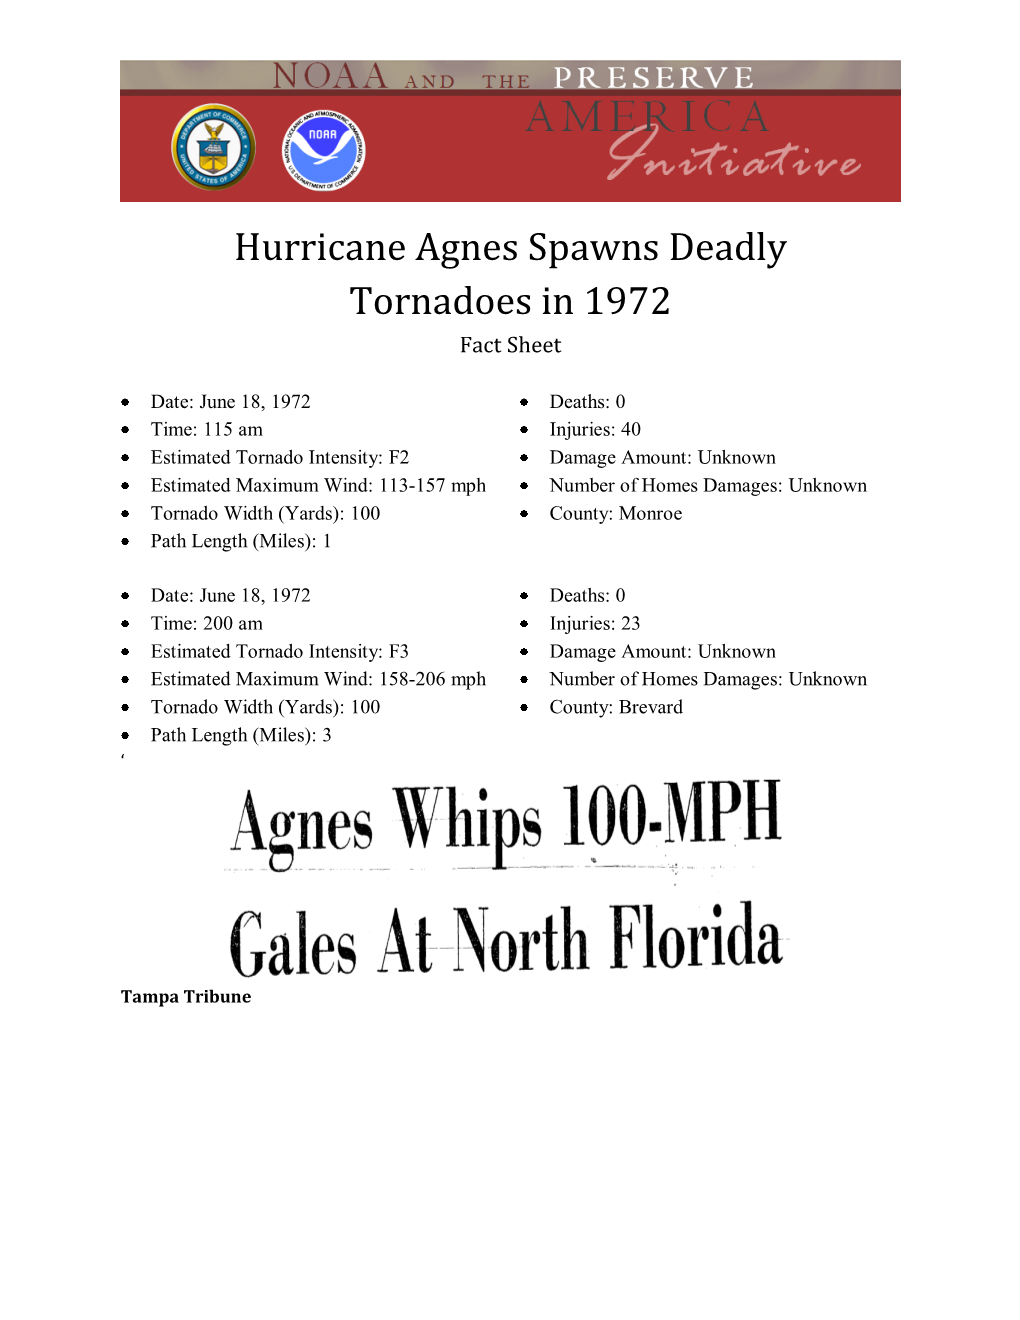 Hurricane Agnes Spawns Deadly Tornadoes in 1972